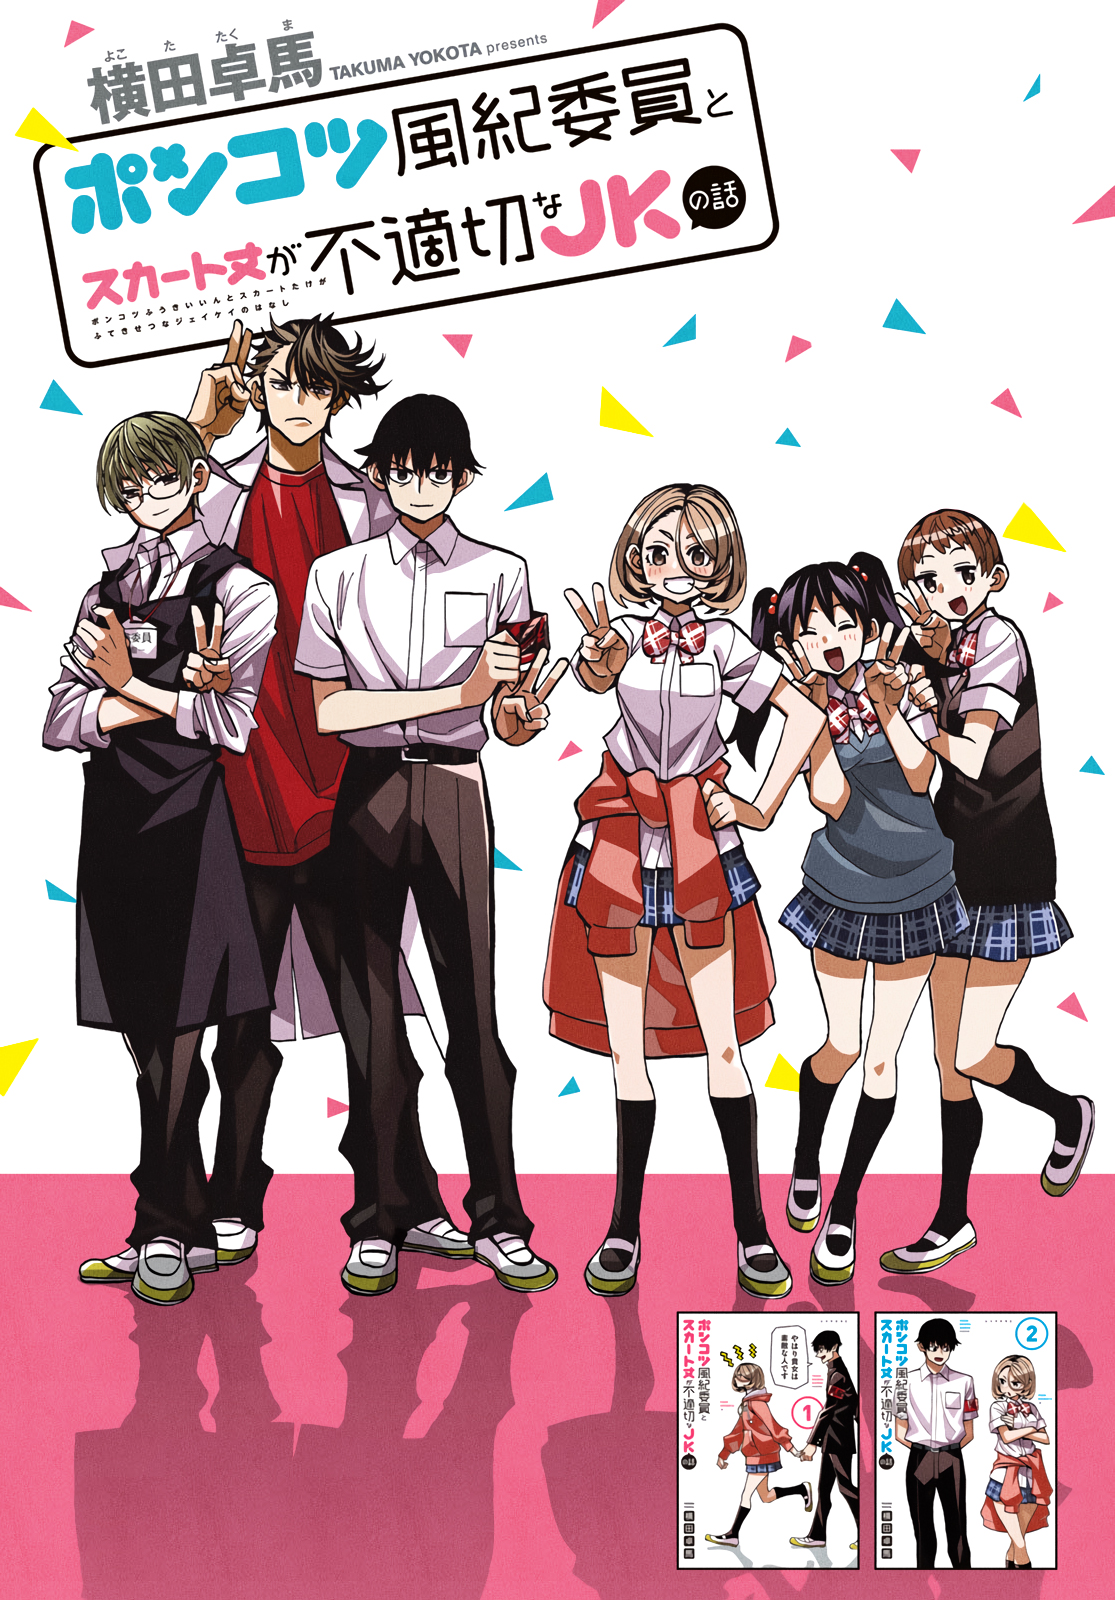 The Story Between a Dumb Prefect and a High School Girl with an Inappropriate Skirt Length Ch. 13 A Story About The Dumb Prefect Being Challenged to a Street Battle